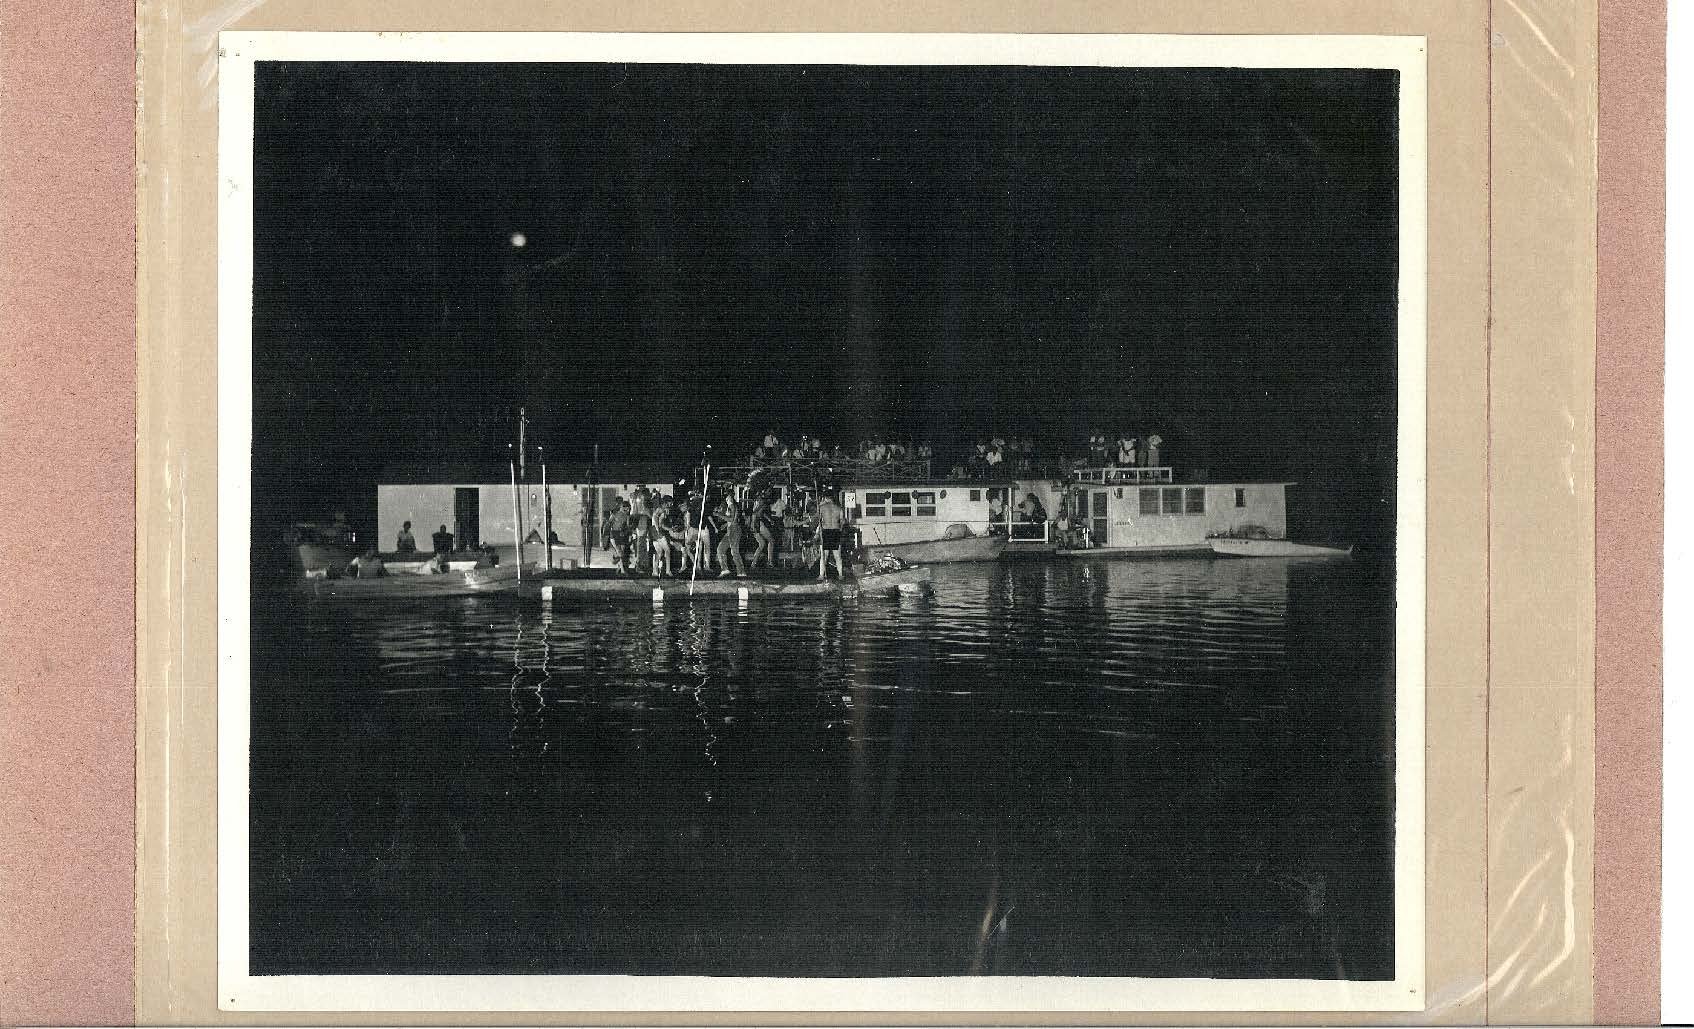 Photo labeled "1940's" shows several boats tied together with dance floor for night time party